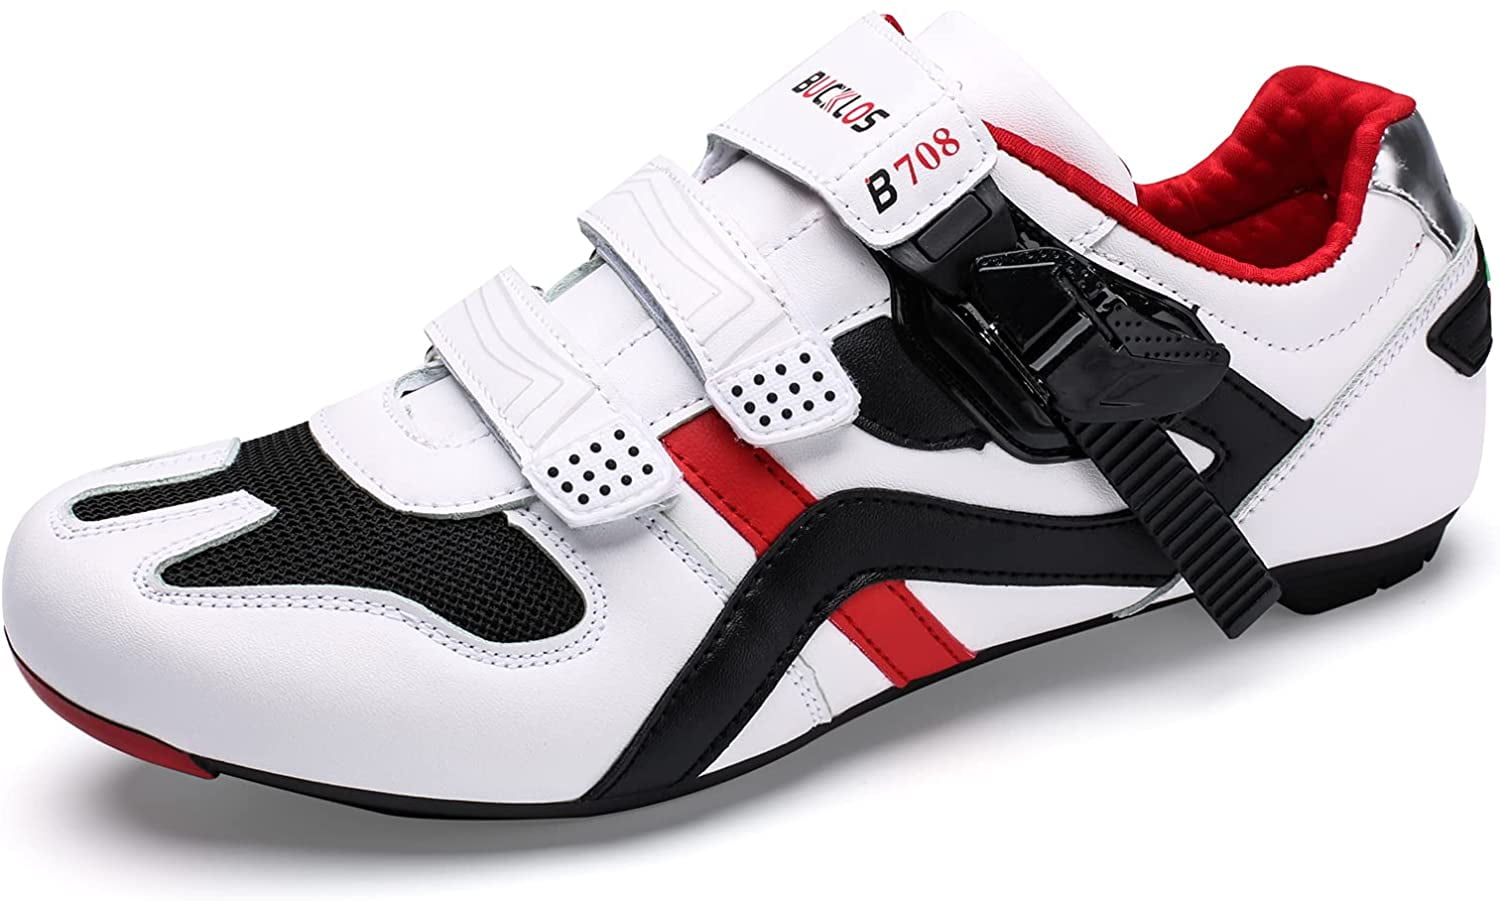 Details about   Men Road Bike Cycling Shoes Outdoor Athletic SPD Cleat Shoes Spinning Shoes MTB 